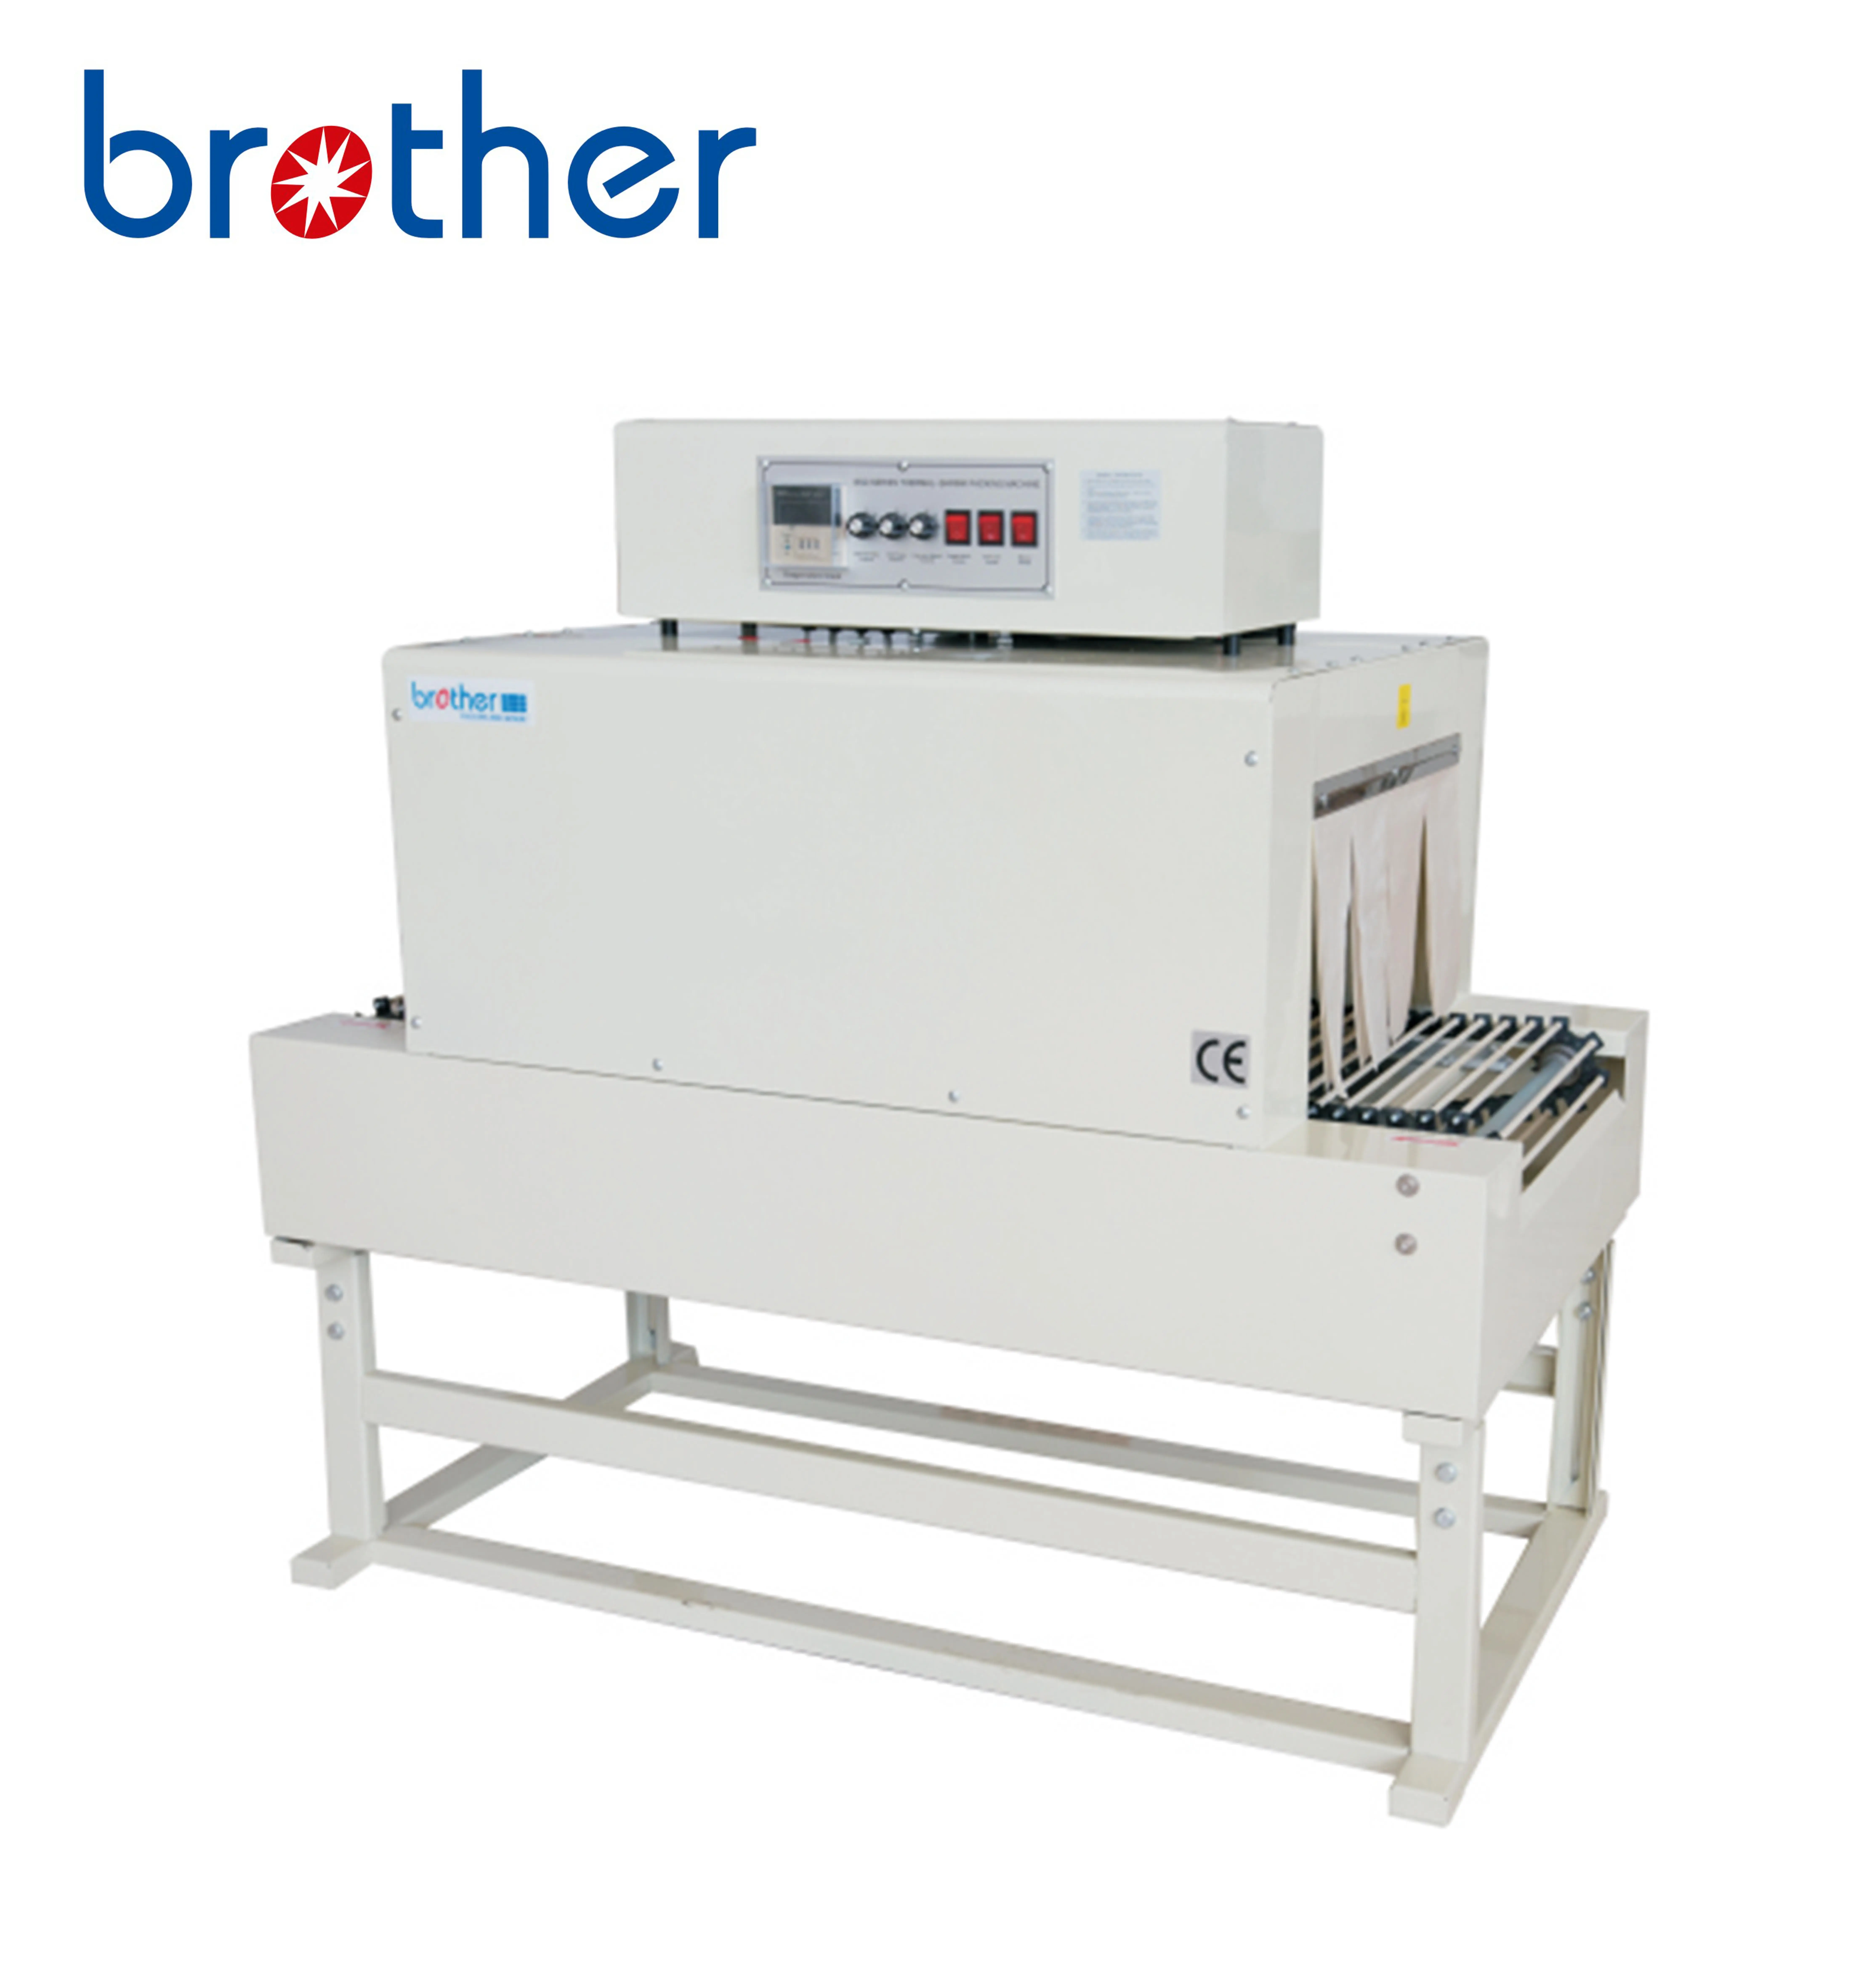 Brother – emballage thermique automatique pour Tunnel, emballage rétractable